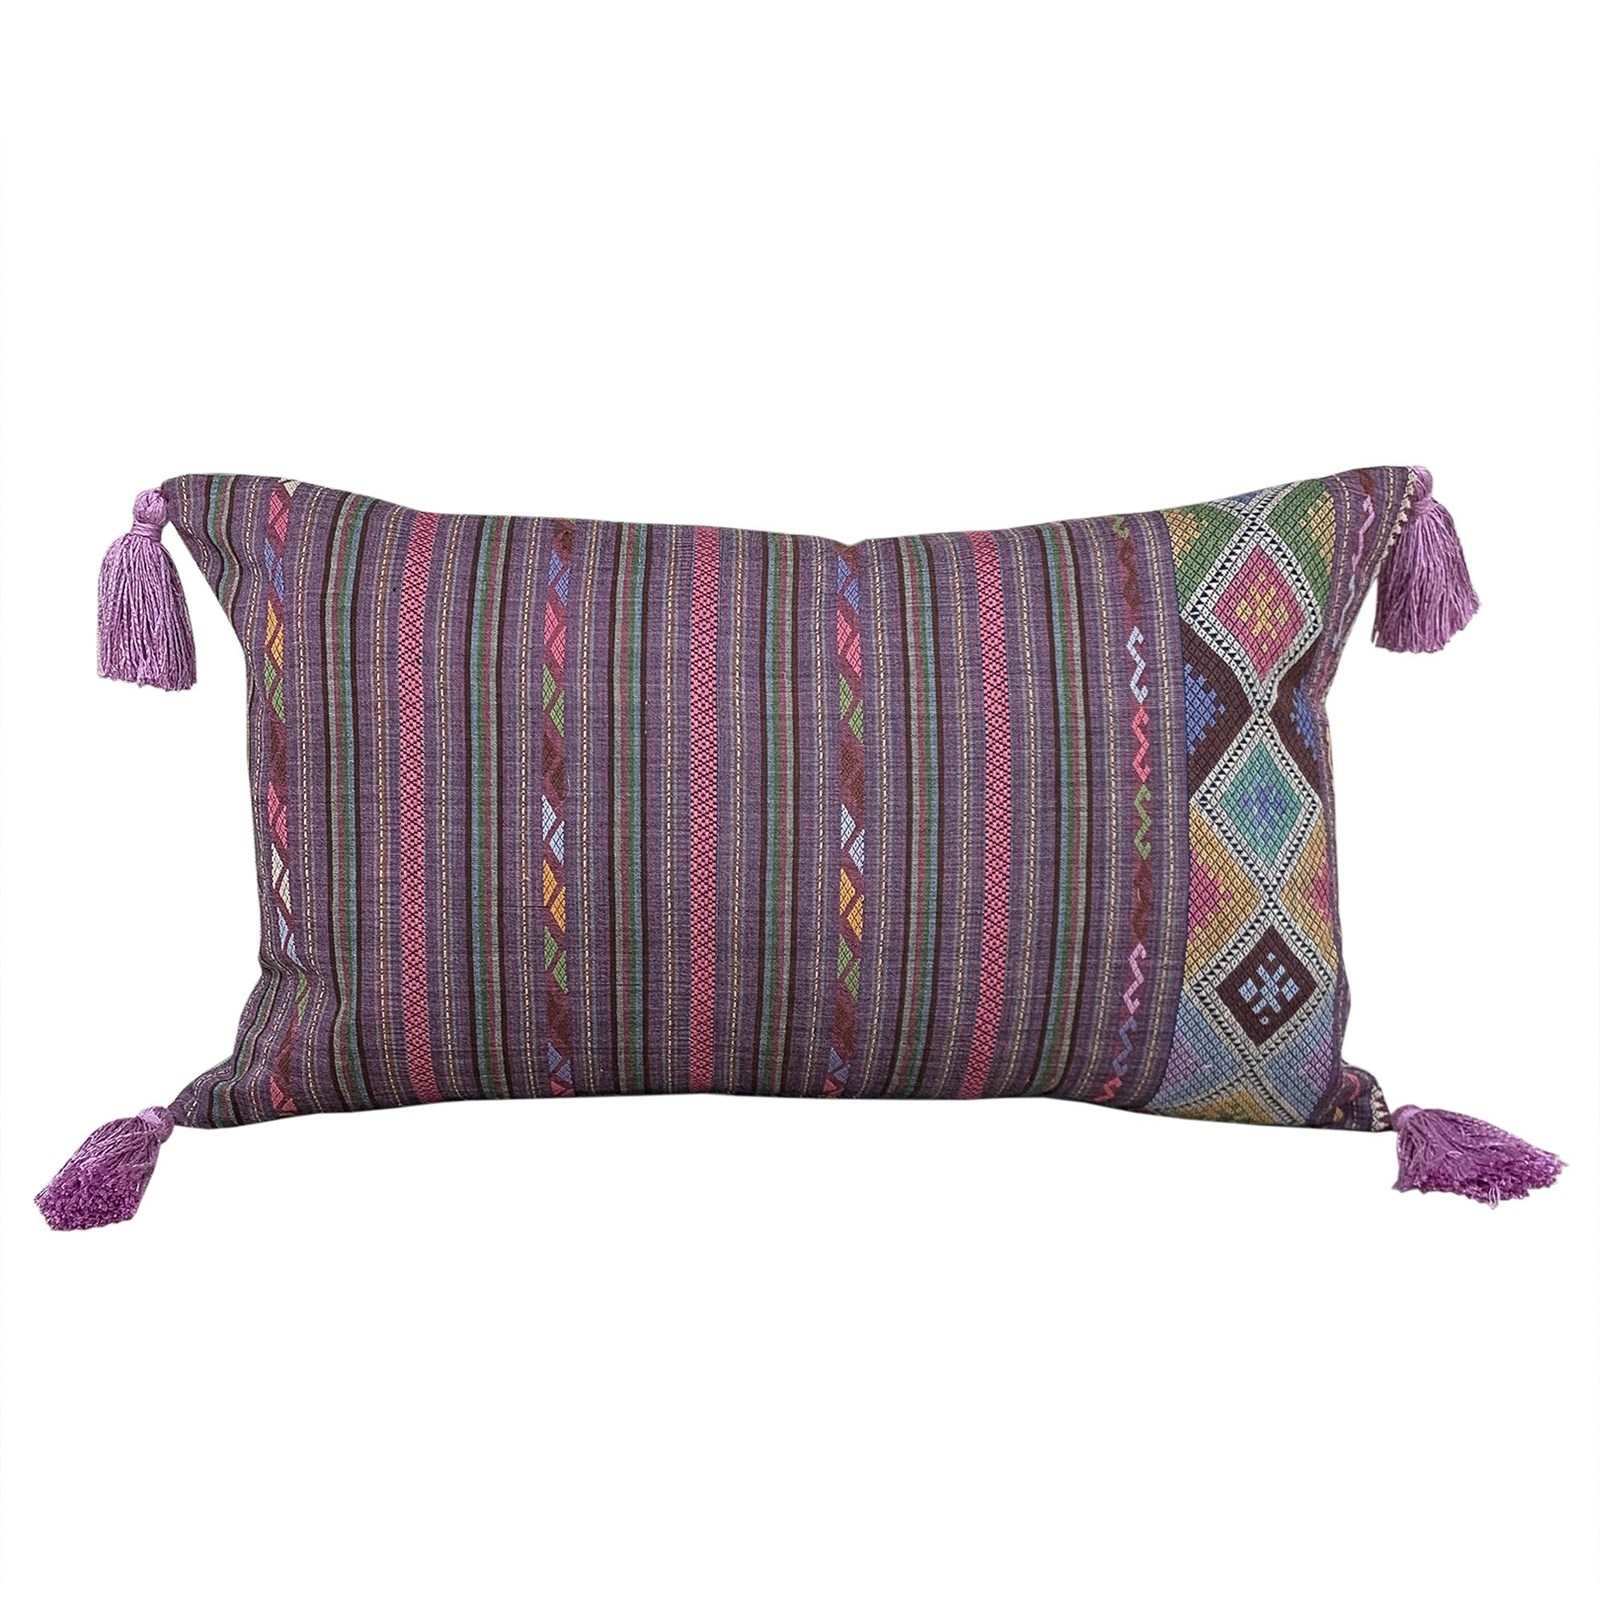 Lao Cushions With Lilac Tassels - Decorative Collective